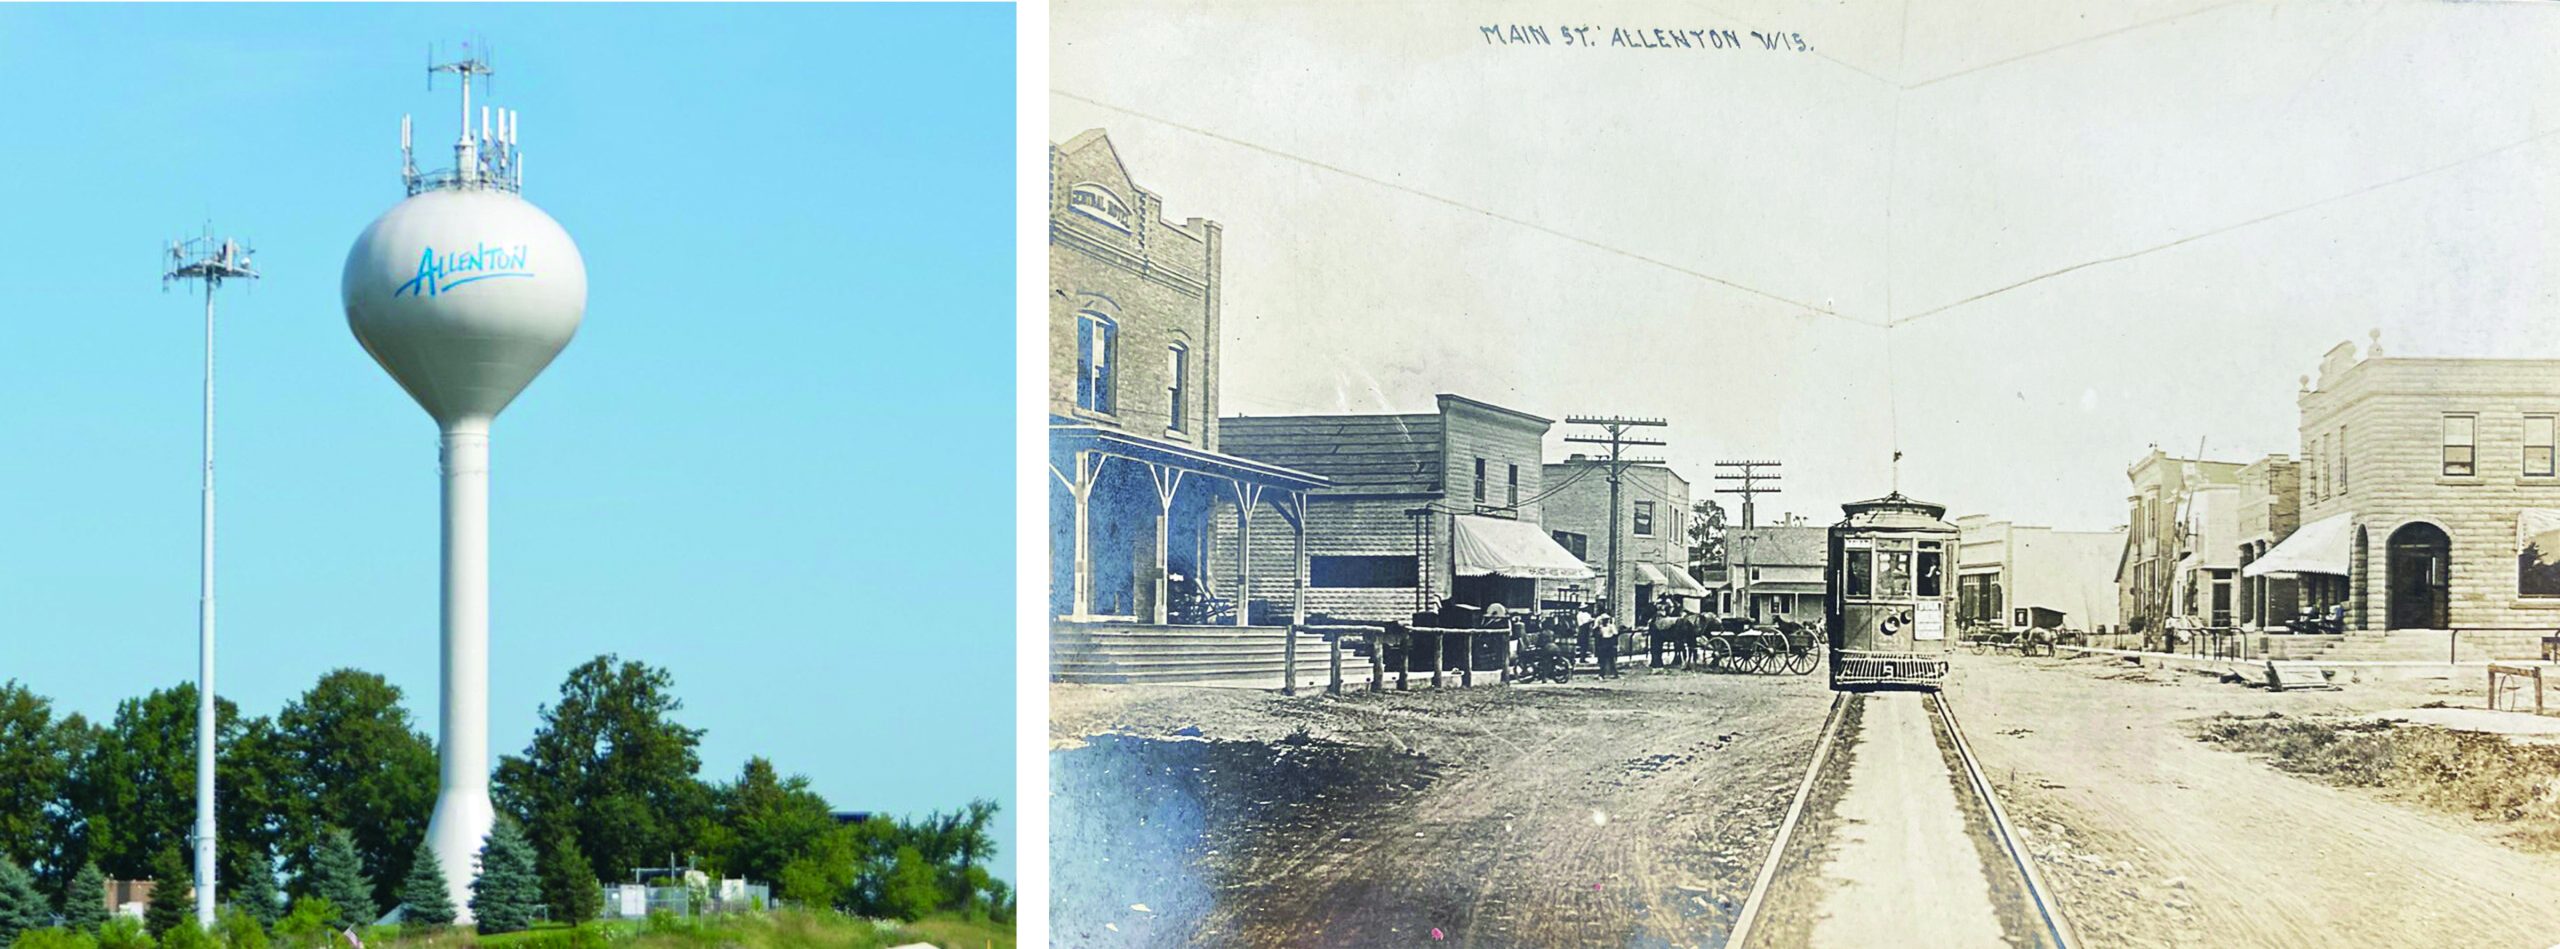 A white water tower with blue lettering that reads "Allenton" sits left in the image frame. The right side depicts Allenton as a historic town in 1913 with a train on tracks surrounded by brick buildings. 